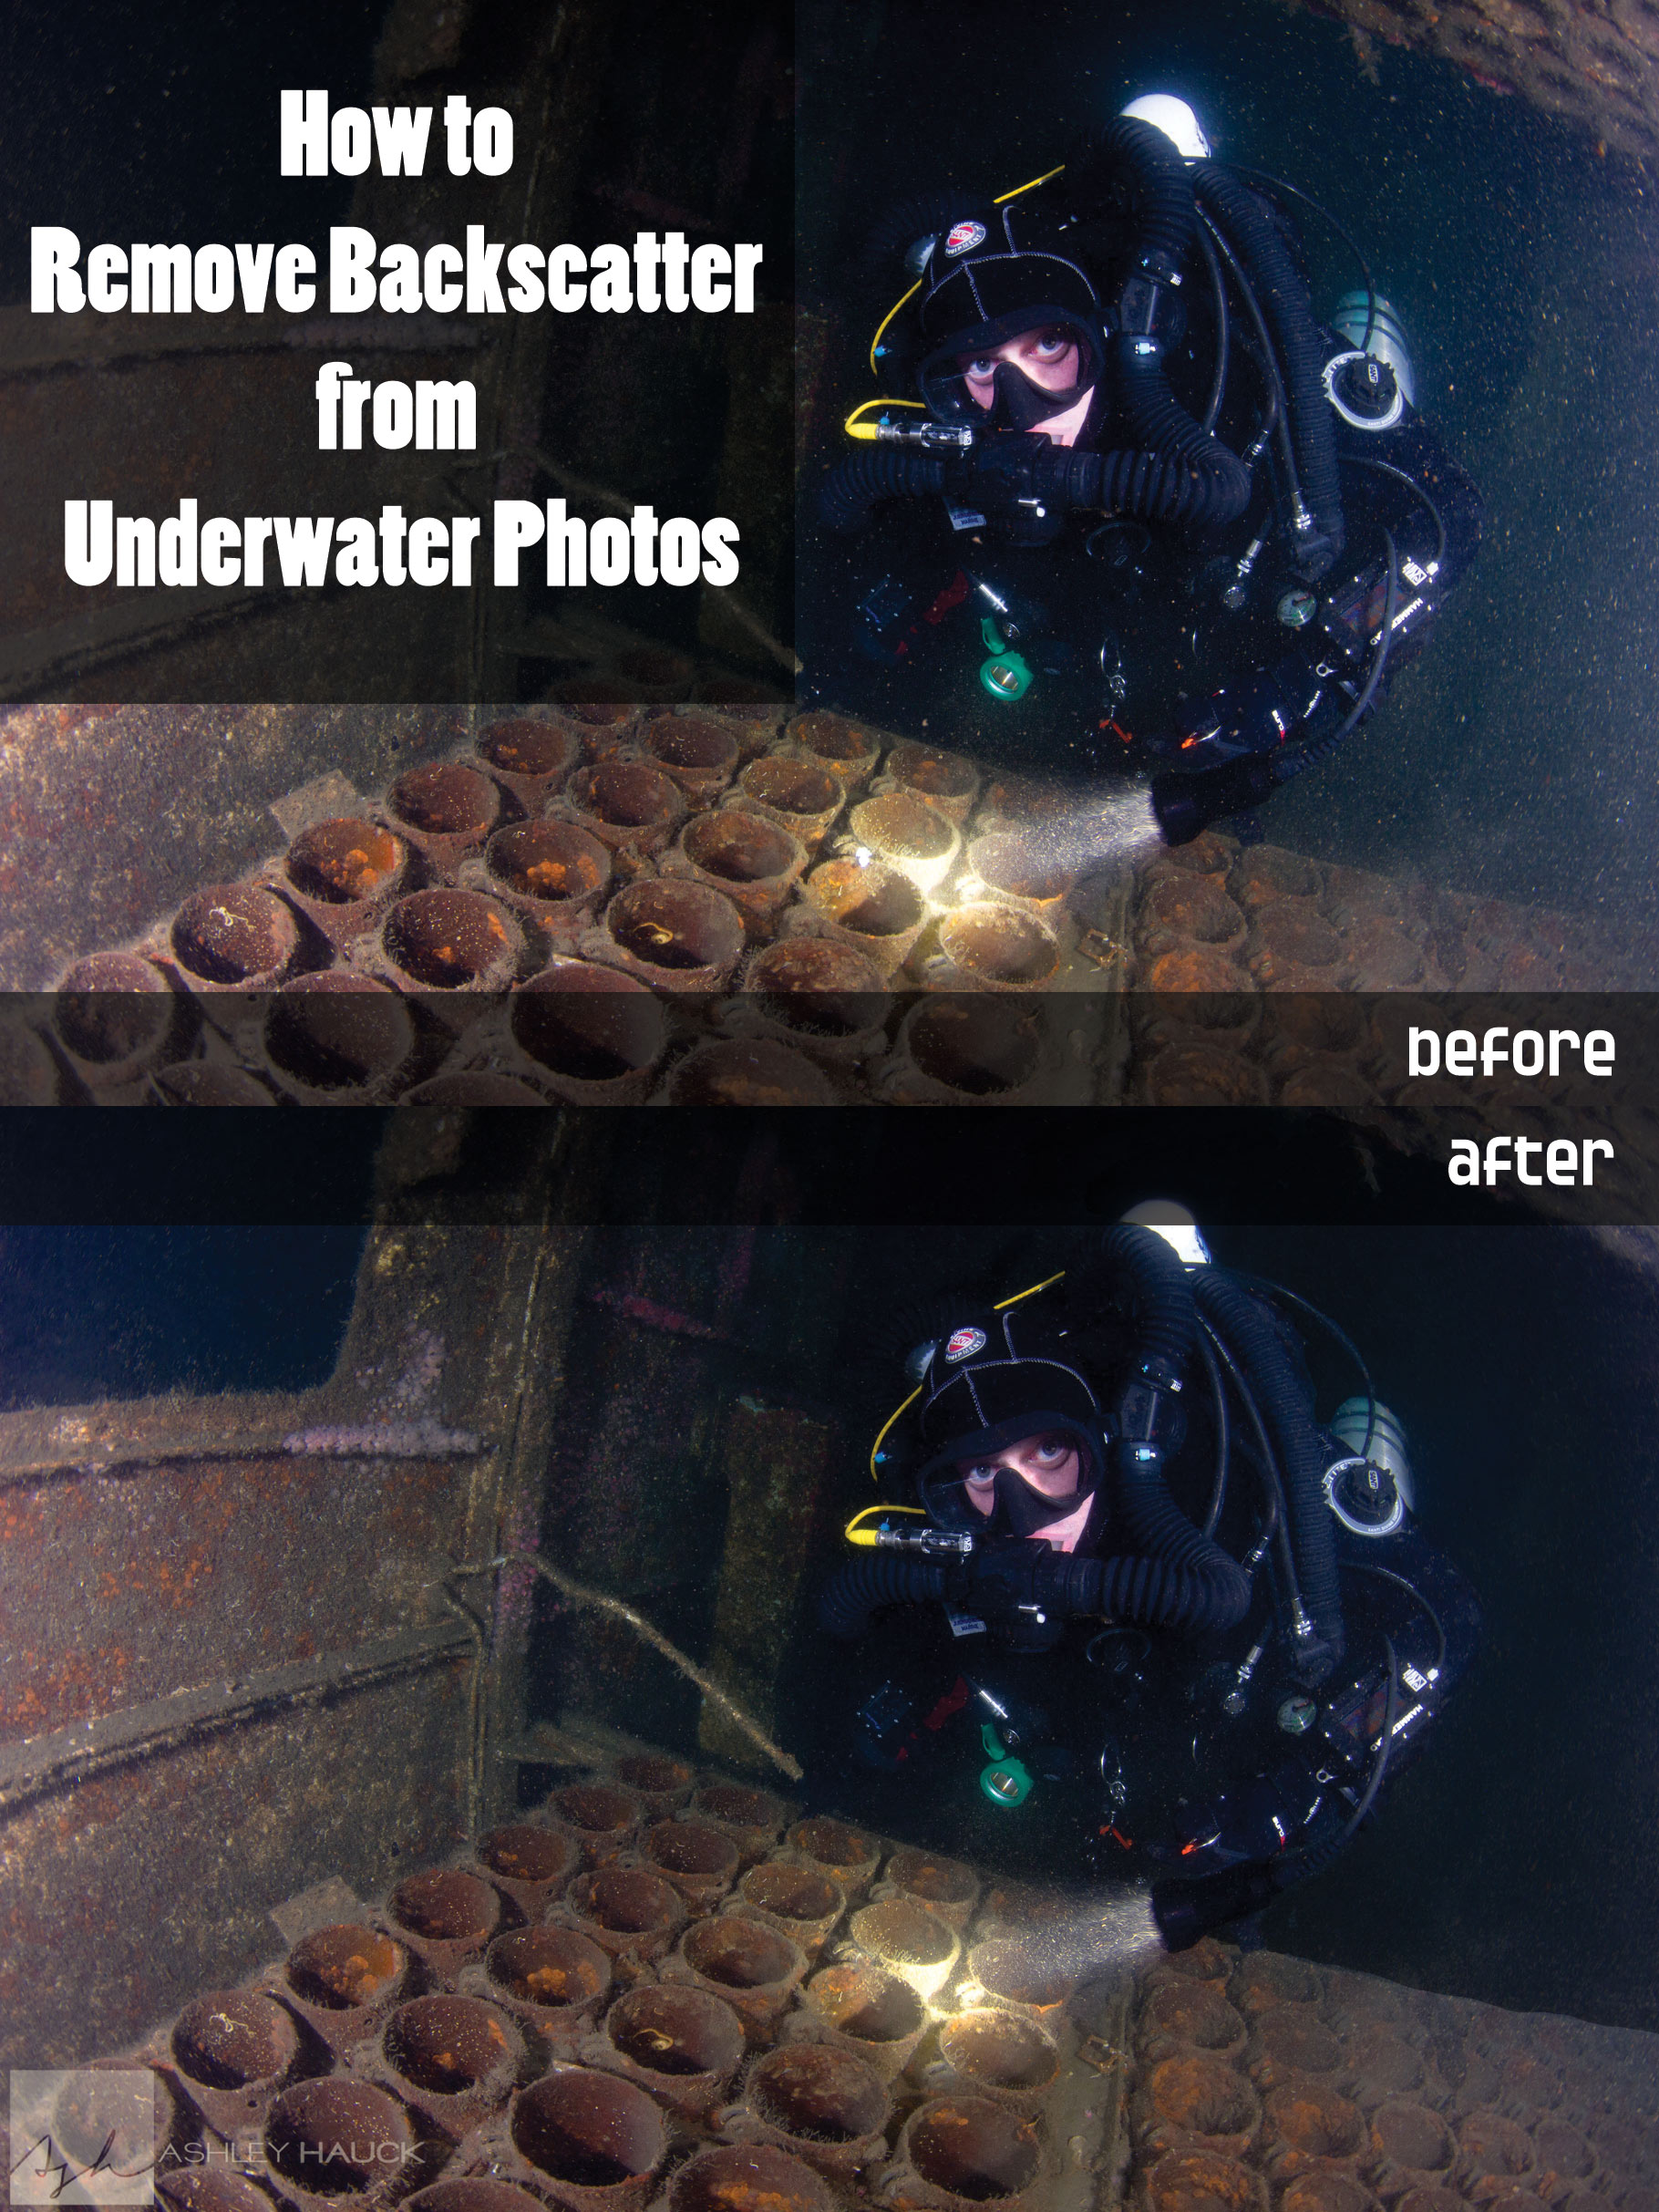 How to Remove Backscatter: The Fastest Way to Improve Your Underwater Photos